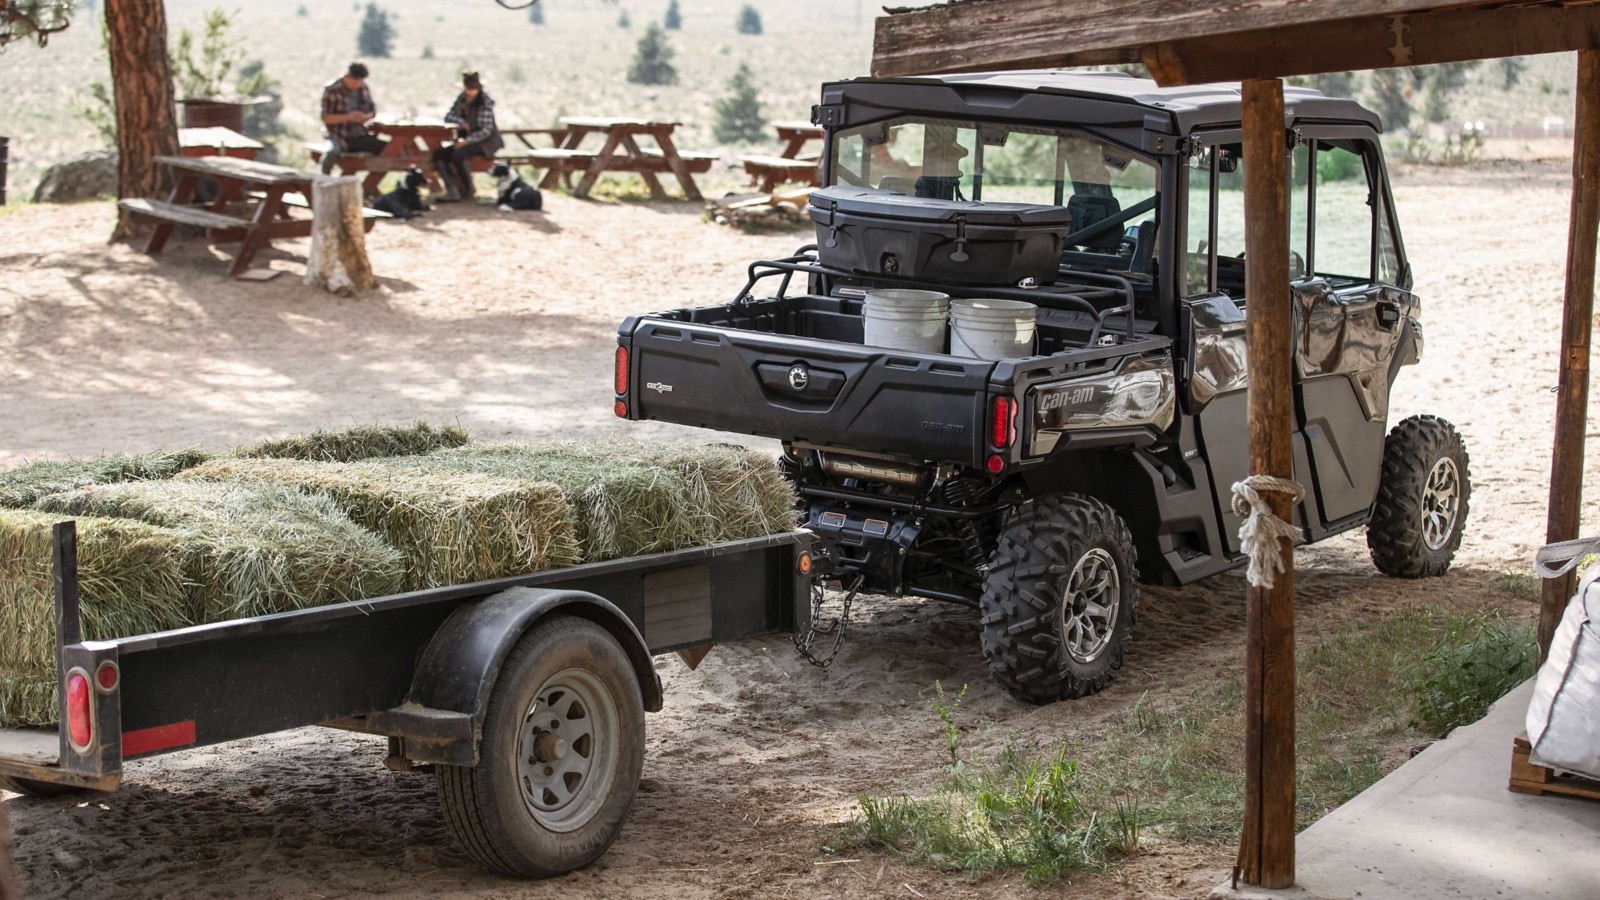 Defender Max Lone Star Cab loaded with work gear, hauling a trailer full of hay.